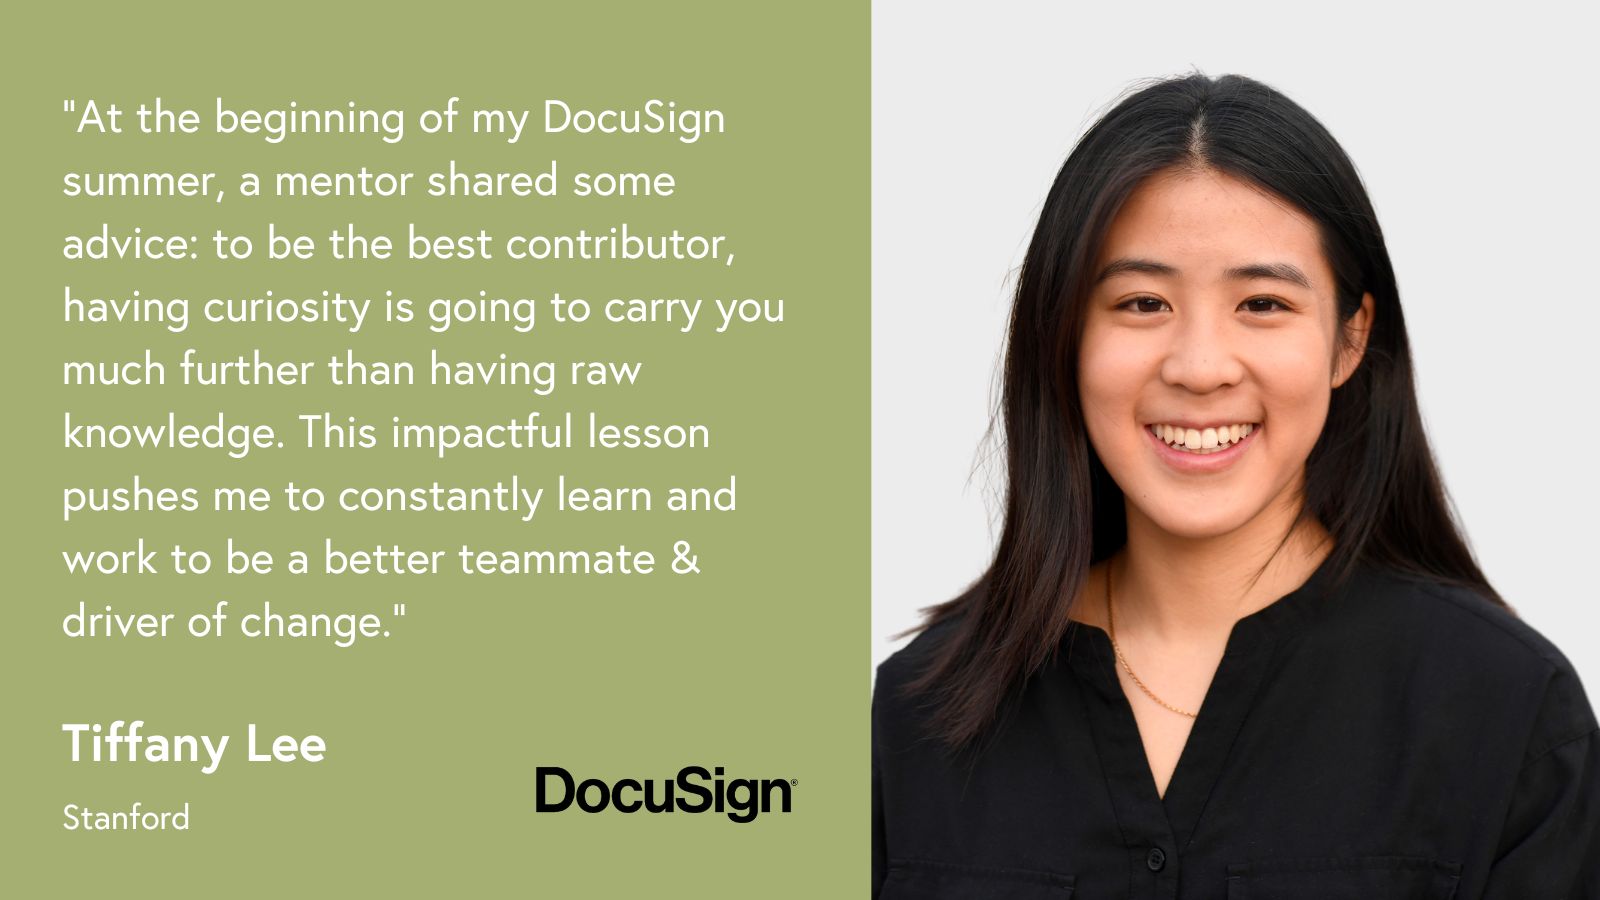 Tiffany Lee - Product Manager Intern at DocuSign